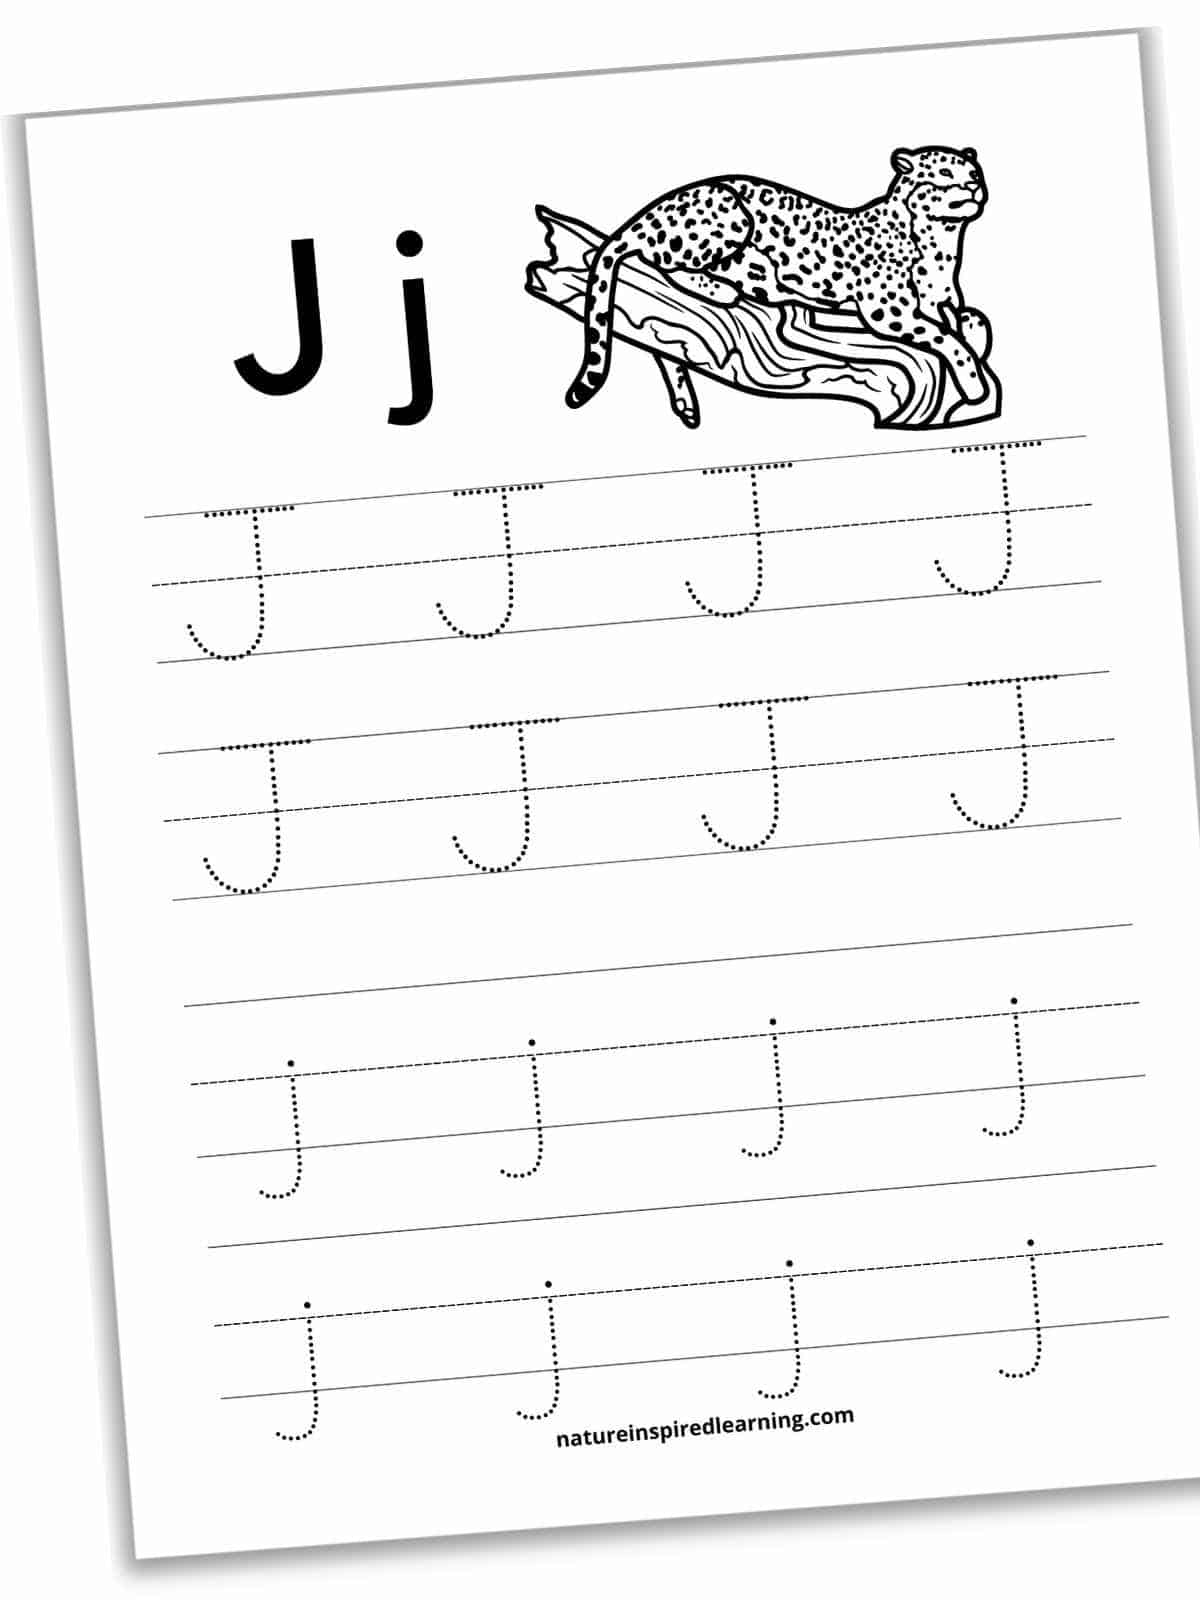 Worksheet with J and j in bold next to a black and white jaguar animal with lines with traceable J's and j's below.